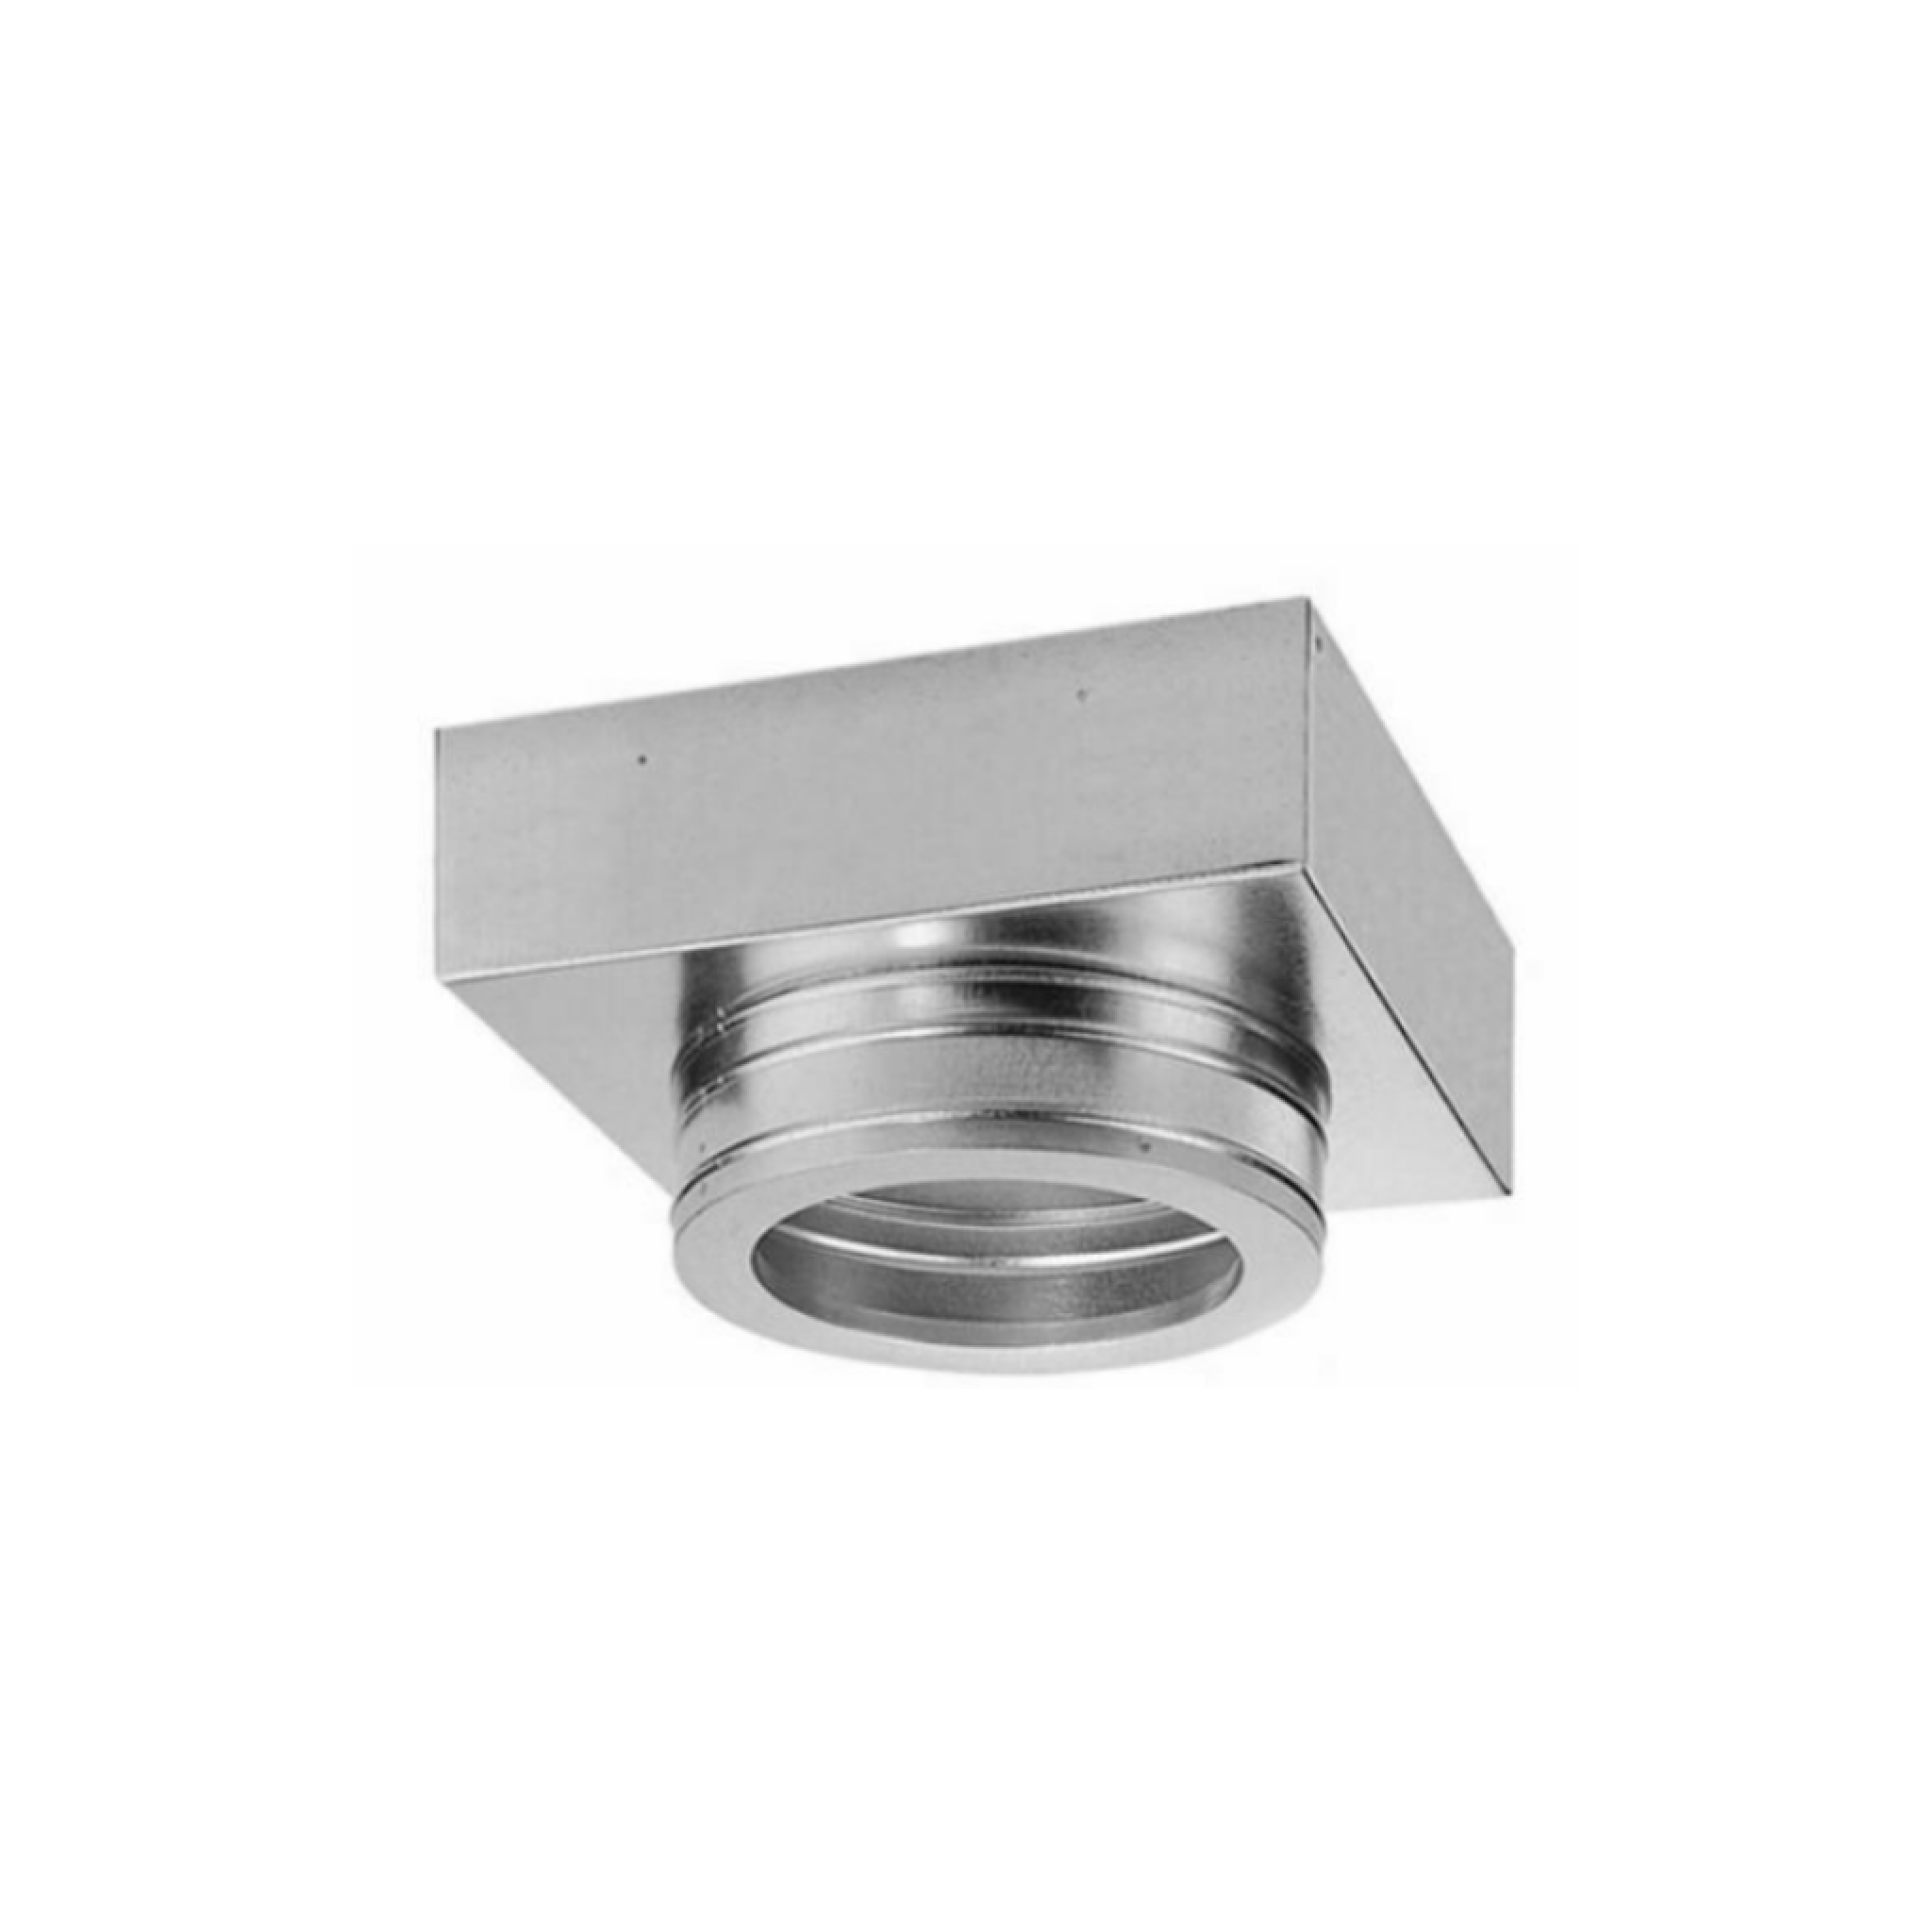 DuraVent 6DT-FCS DuraTech Flat Ceiling Support Box - 6